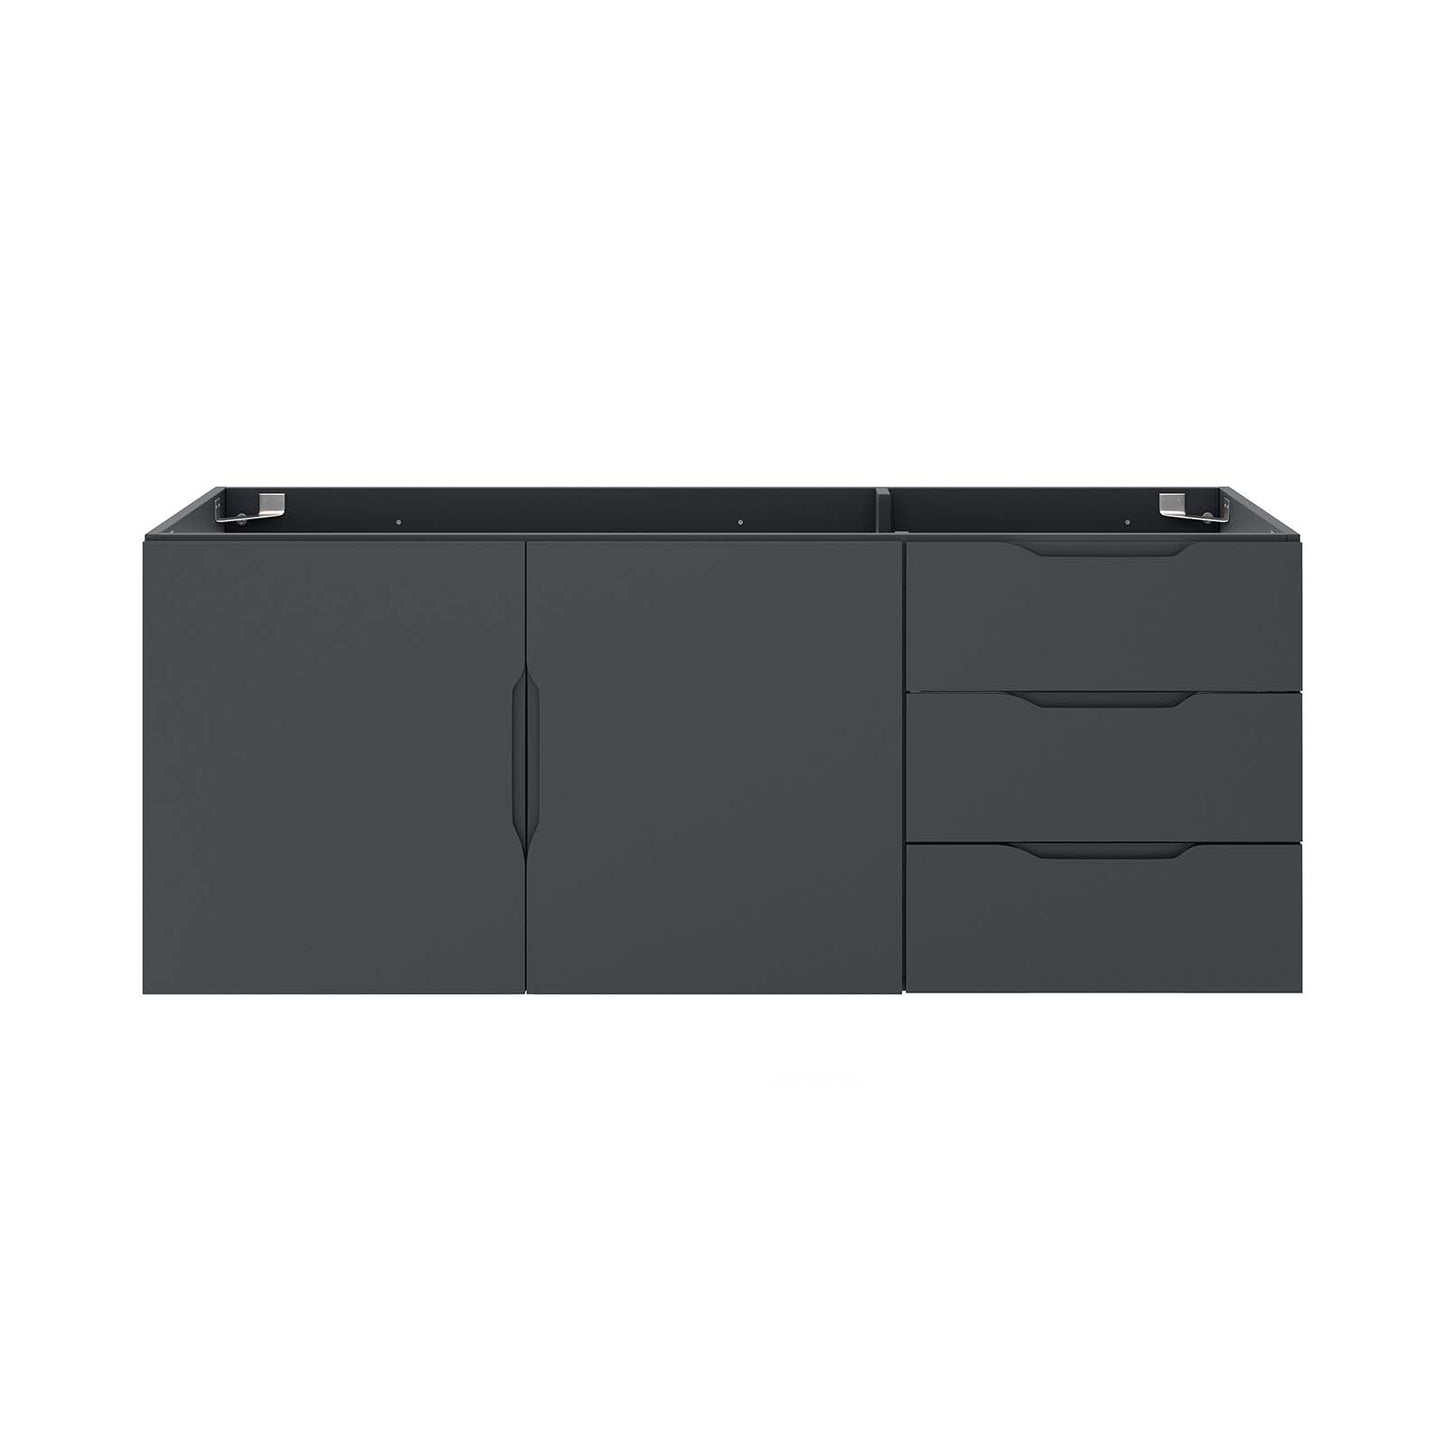 Vitality 48" Double or Single Sink Compatible (Not Included) Bathroom Vanity Cabinet Gray EEI-4895-GRY